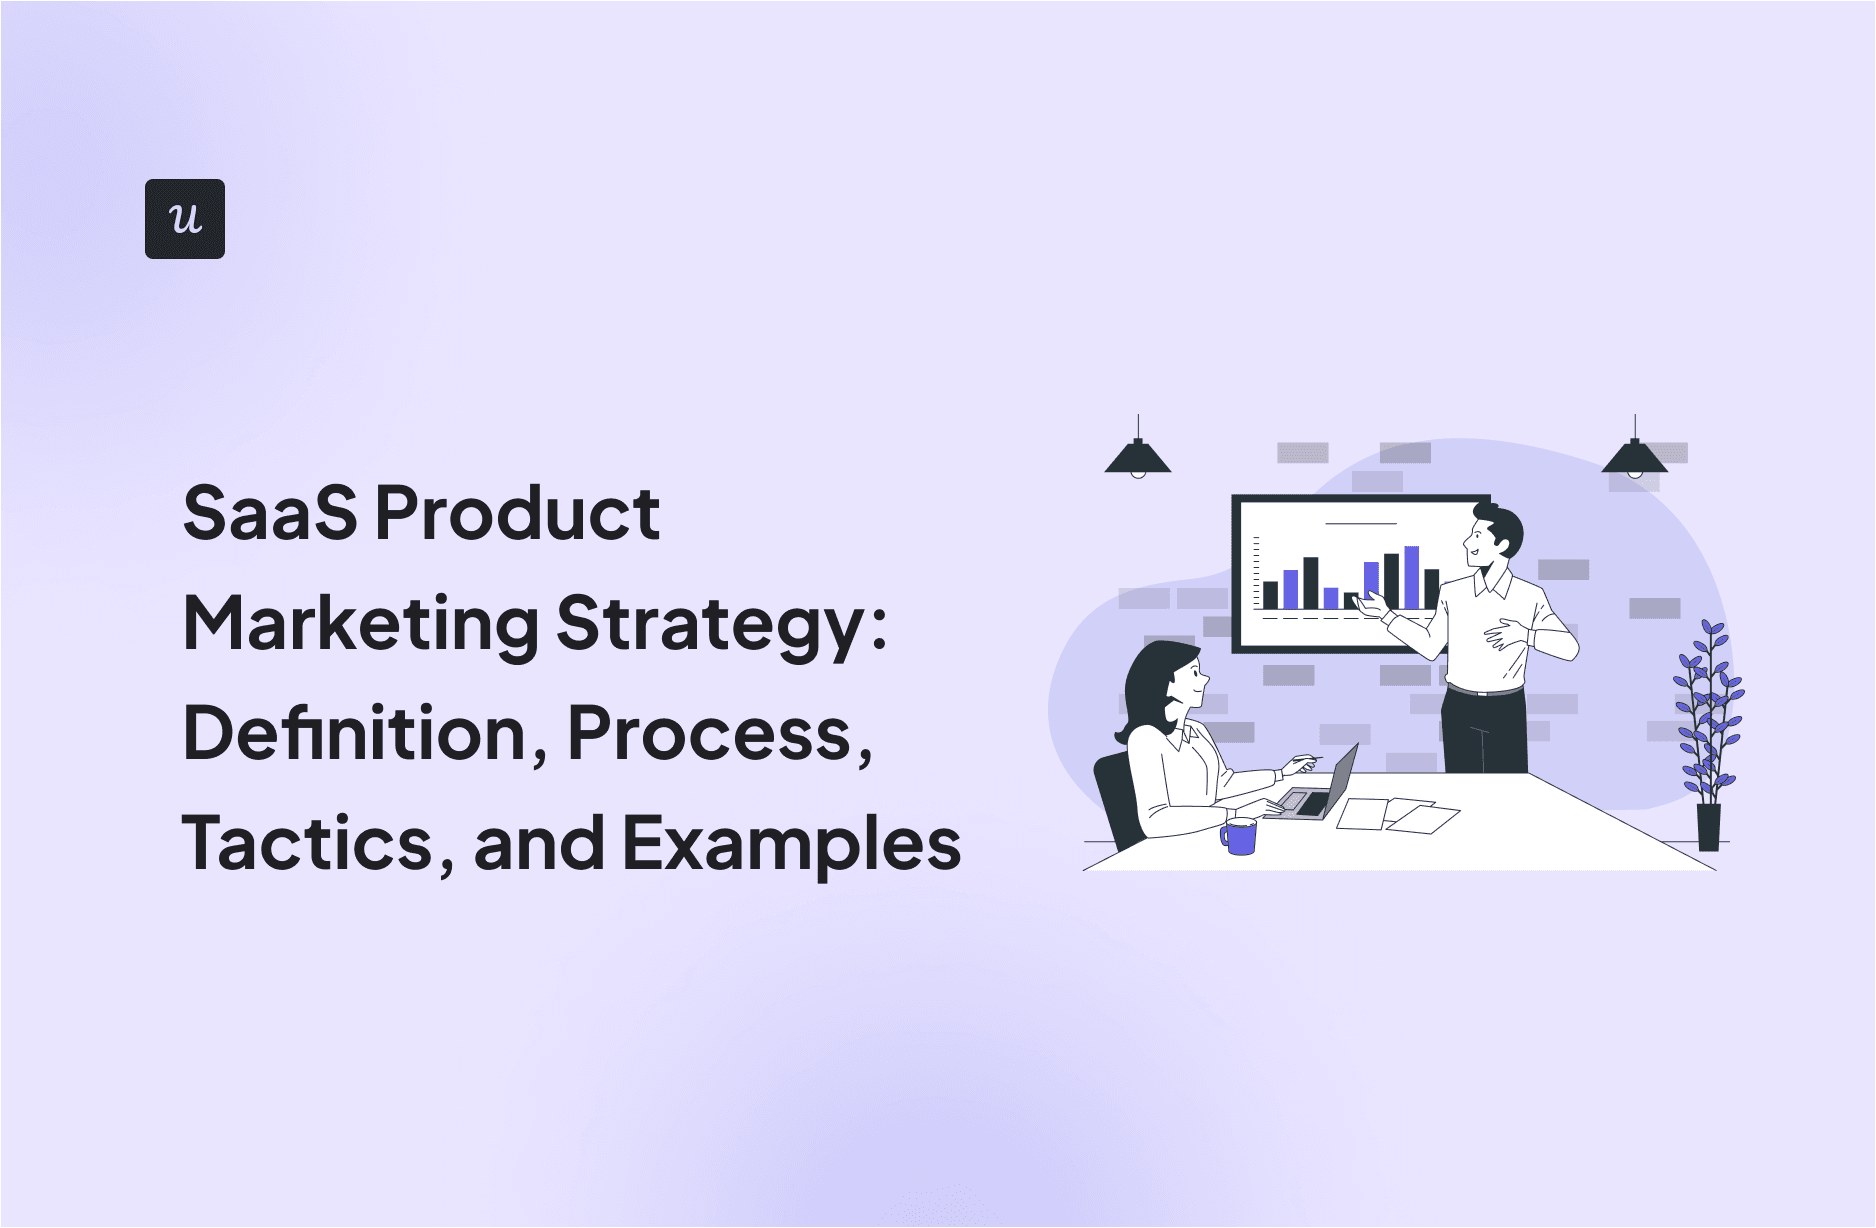 SaaS Product Marketing Strategy: Definition, Process, Tactics, and Examples cover